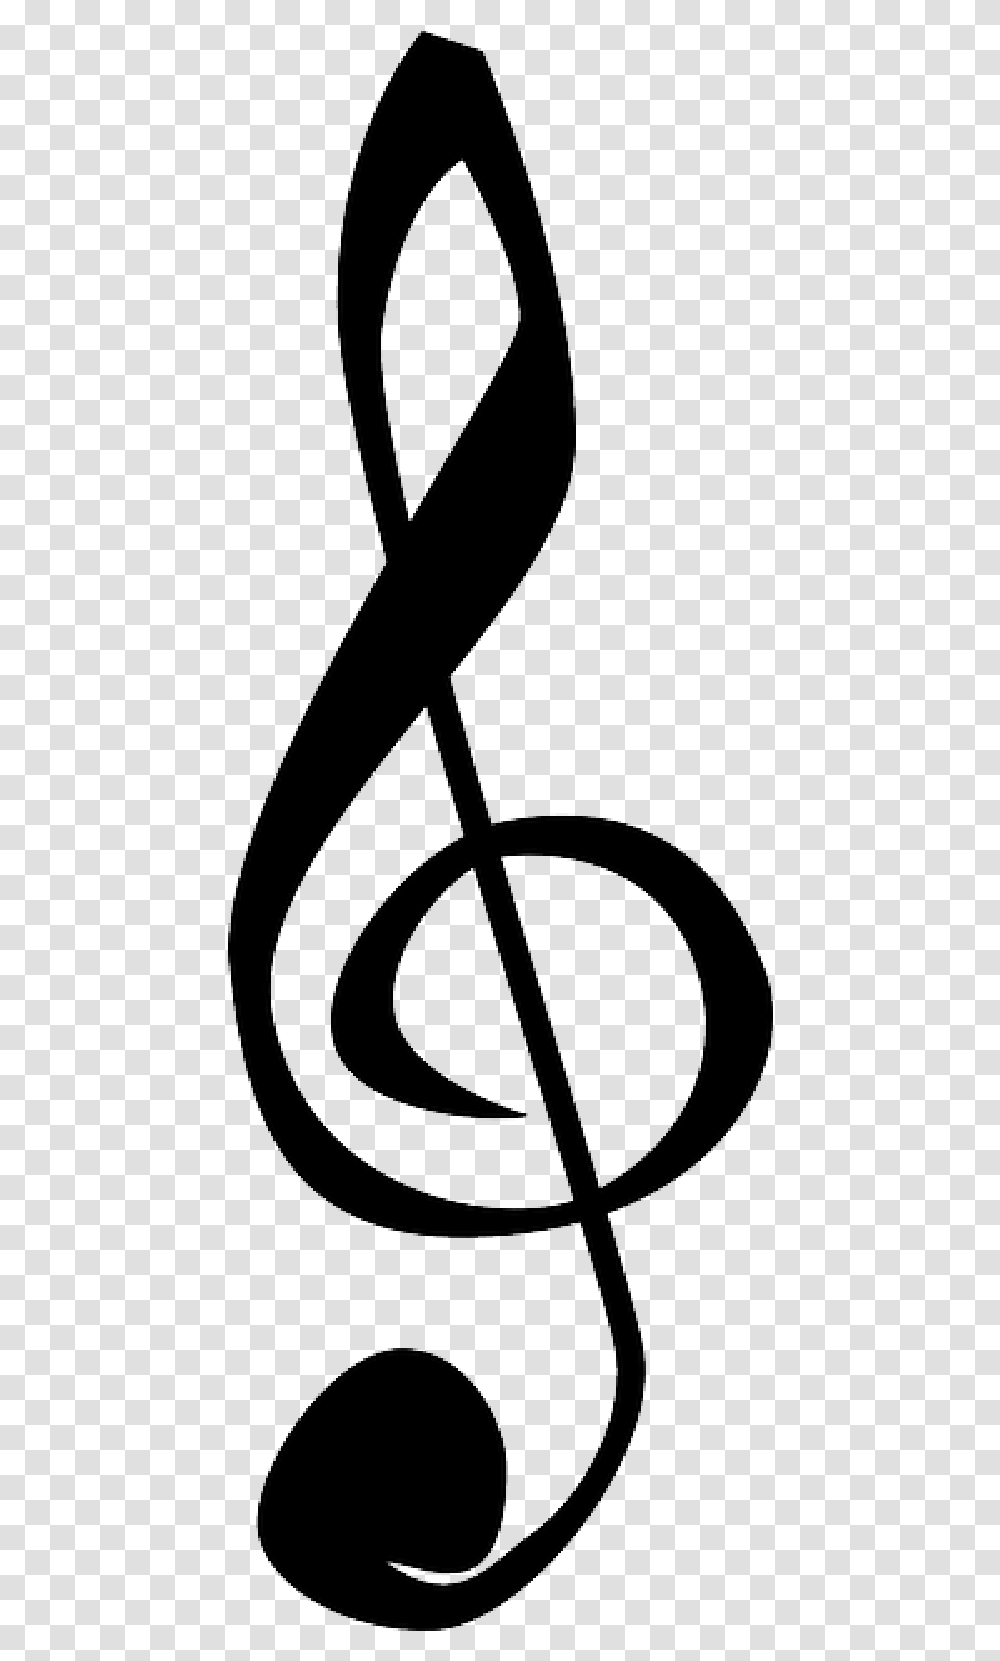 Black Music Note Icon Image Clipart Music Notes Background, Leisure Activities, Musical Instrument, Sundial Transparent Png